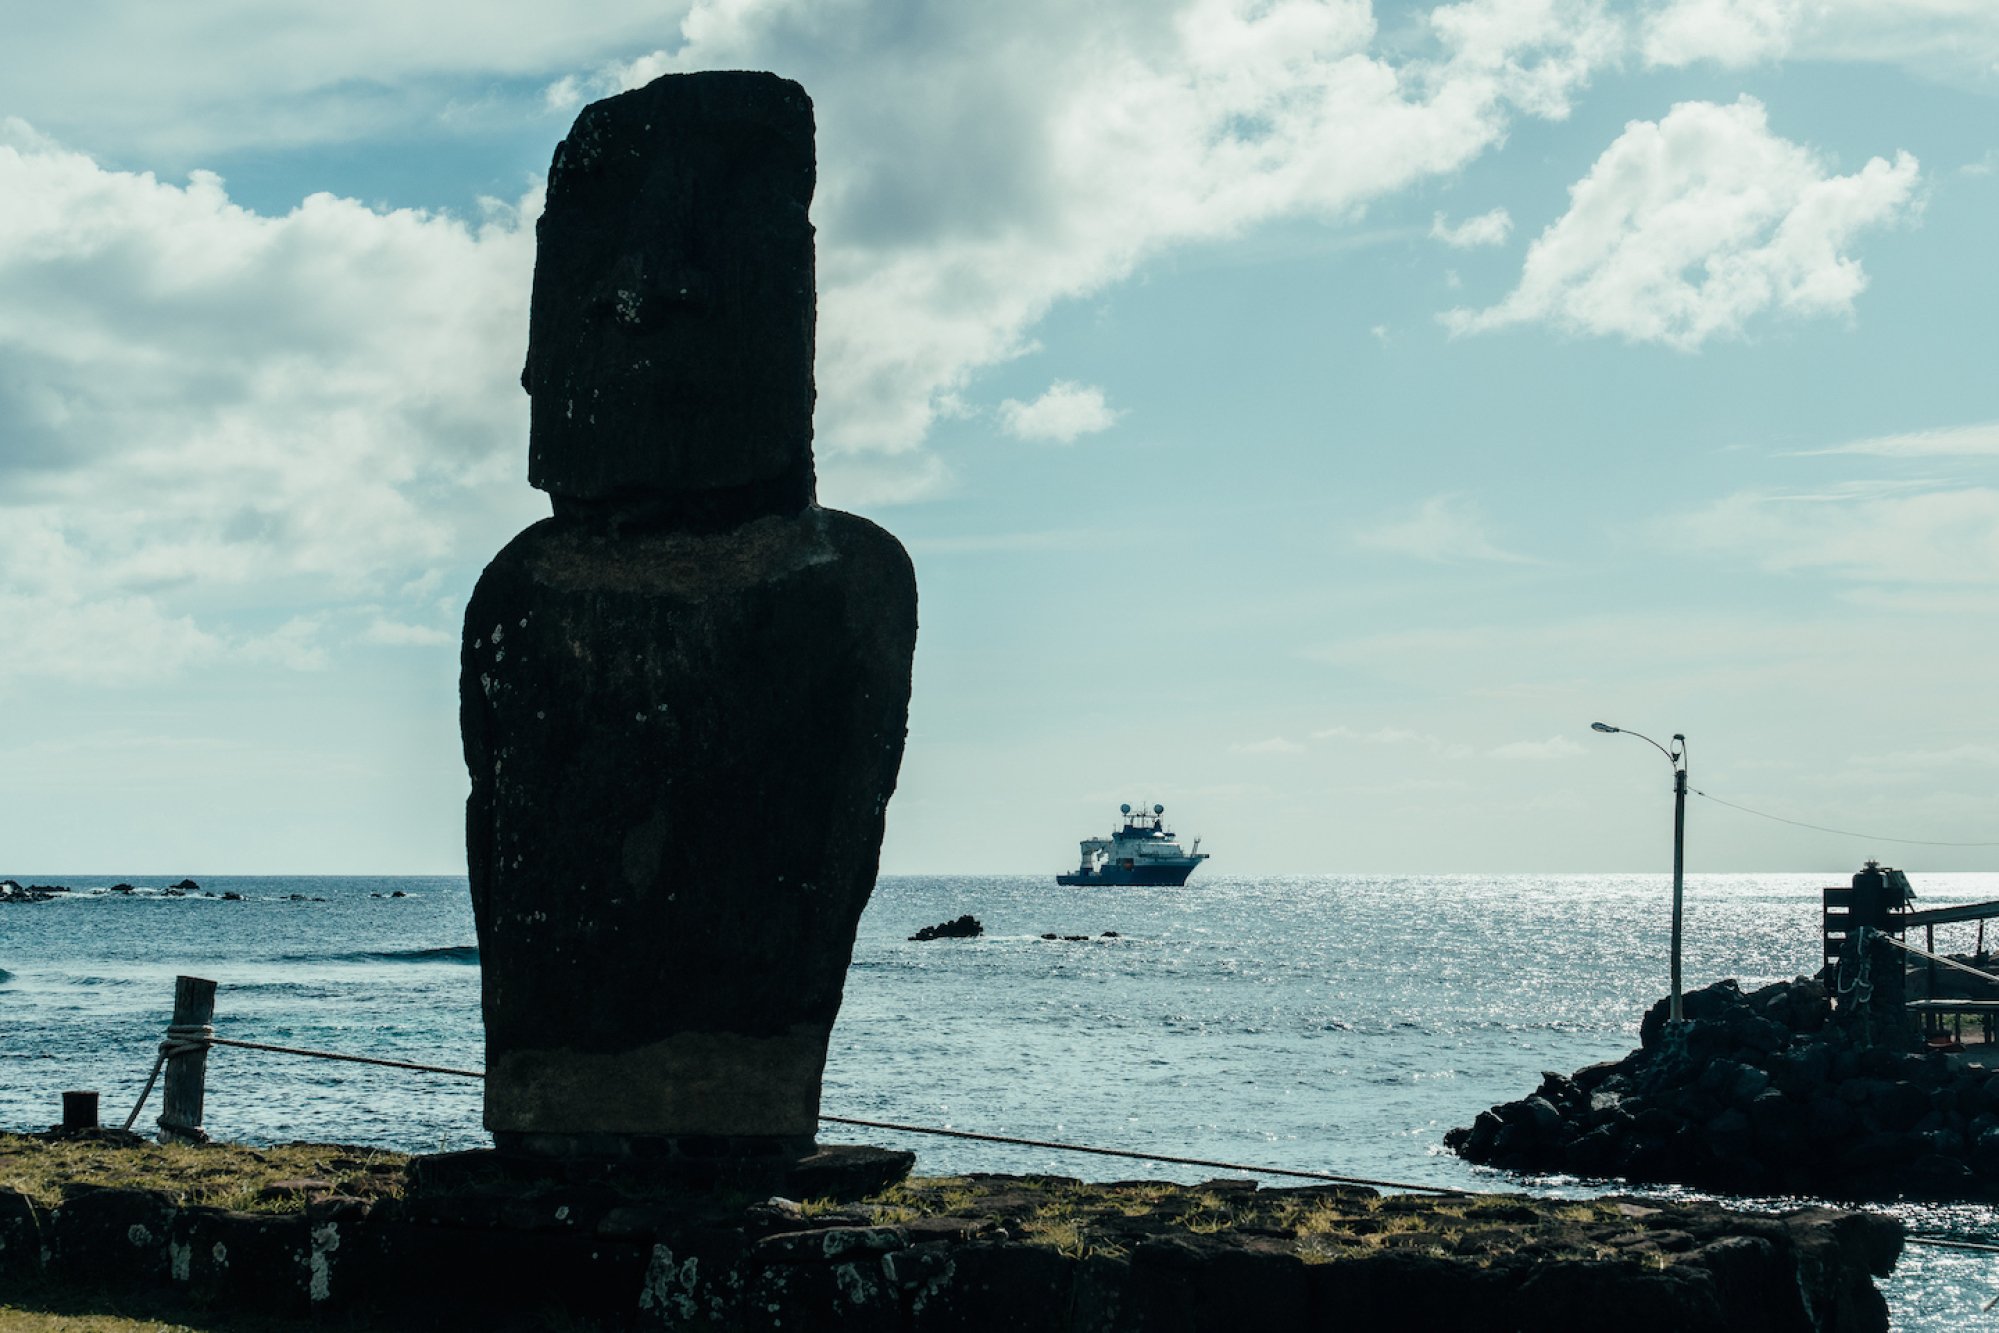 A moai on Rapa Nui (Easter Island), with the exploration vessel RV Falkor (too) in the background.